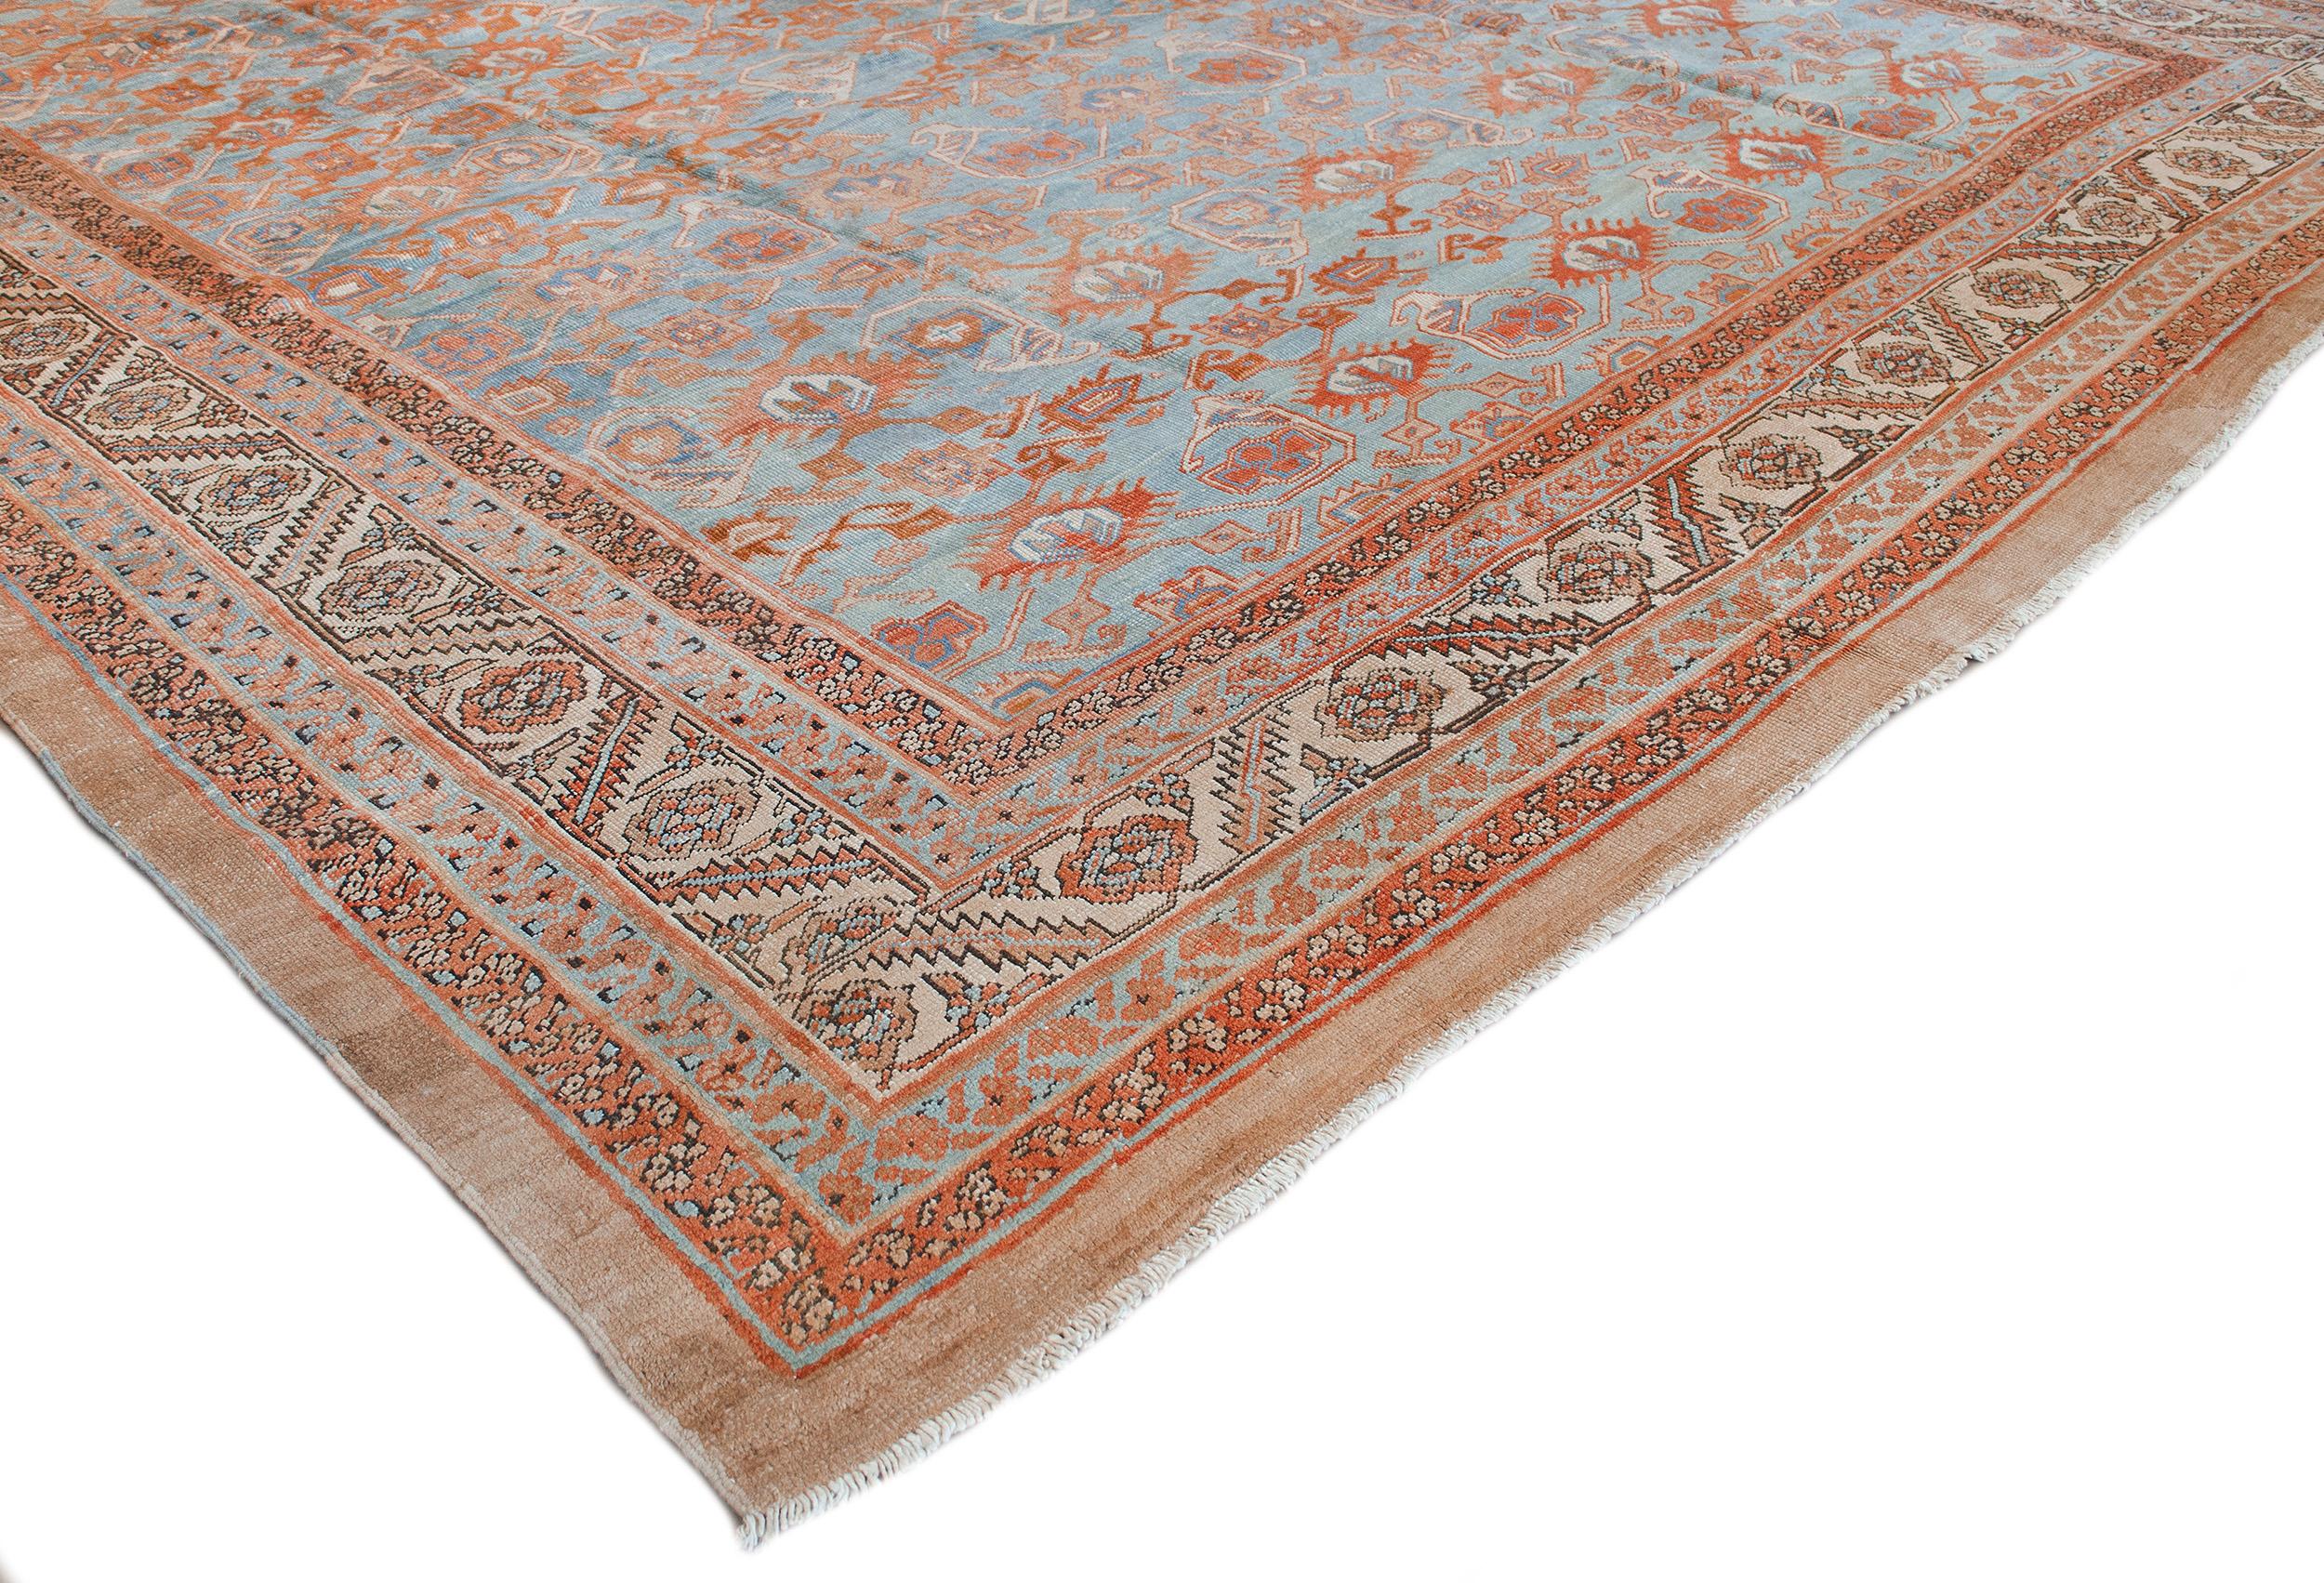 This traditional handwoven Persian Bakhshaish rug has a shaded medium blue field of stylized palmettes issuing angled geometric vines, in an ivory border of rosettes issuing serrated vines, between complementary ornate floral vine stripes, plain